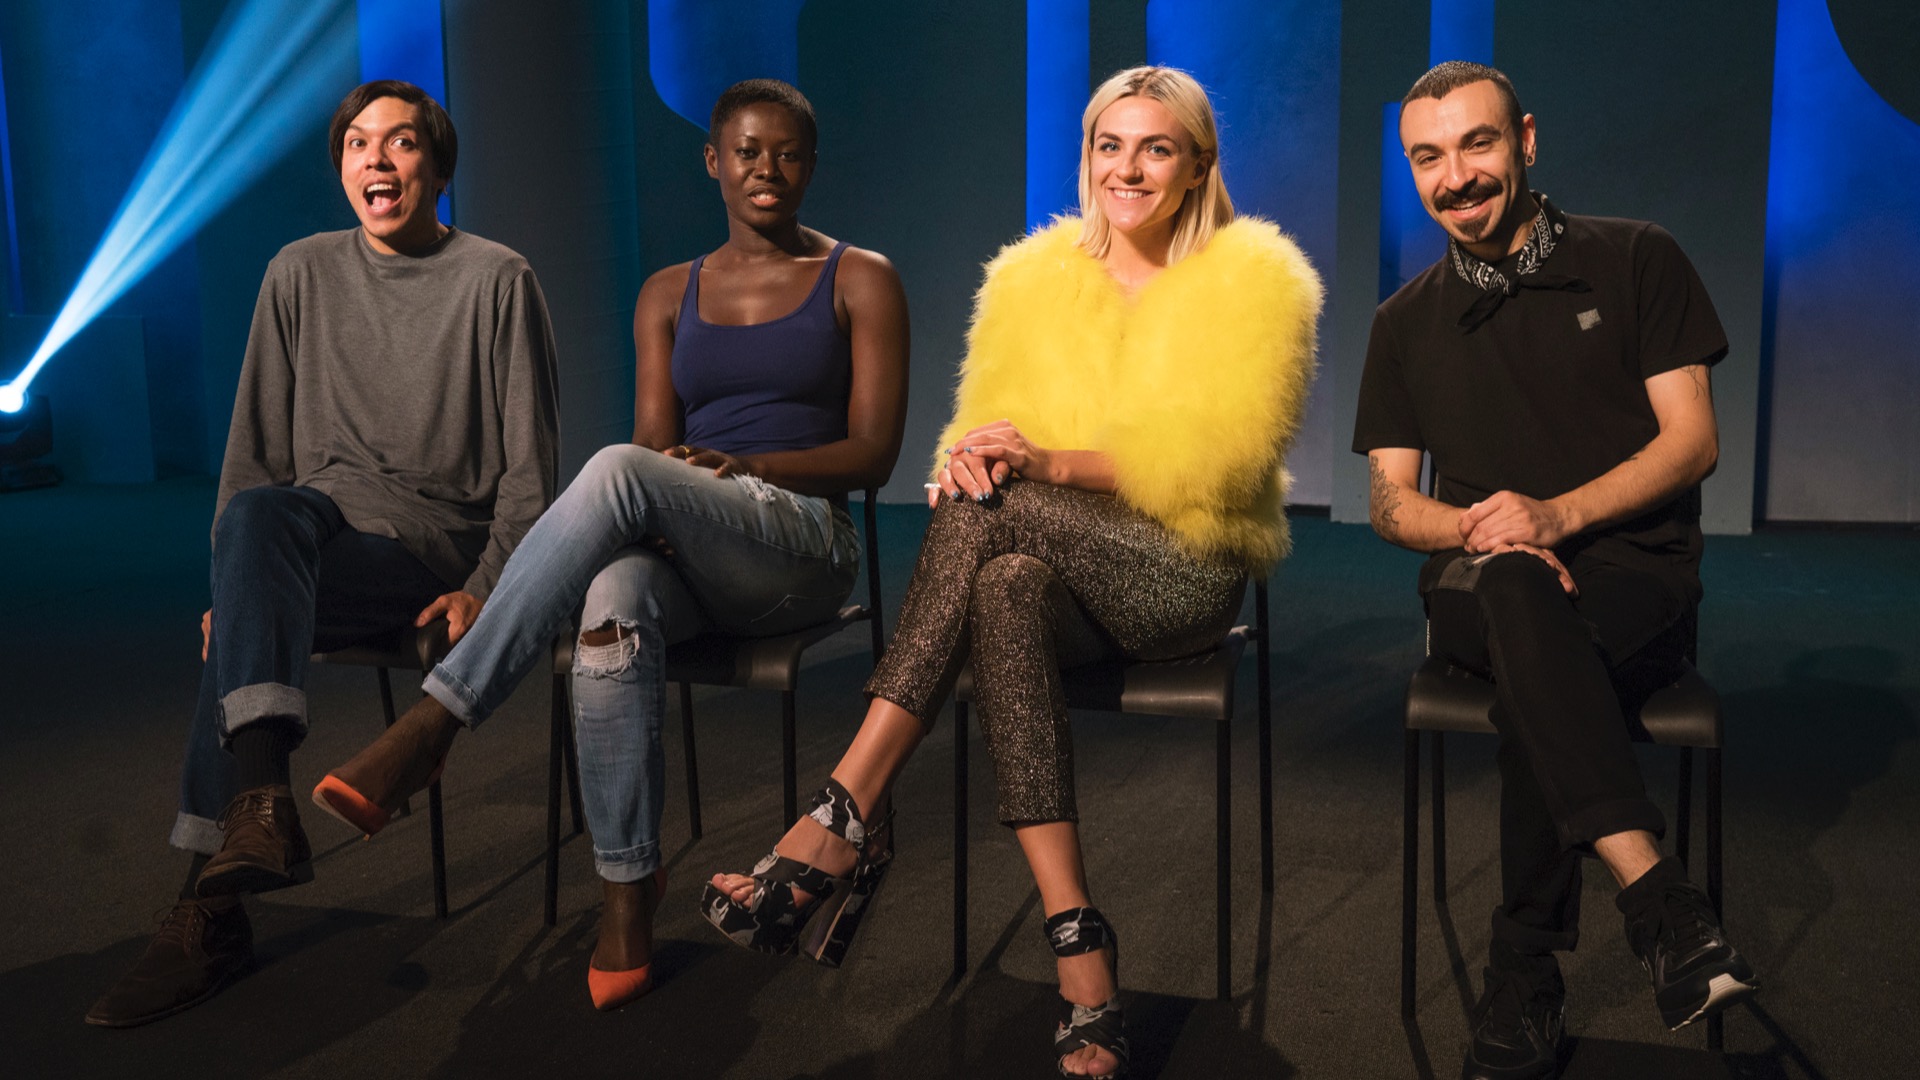 who went home on project runway season 15 episode 7